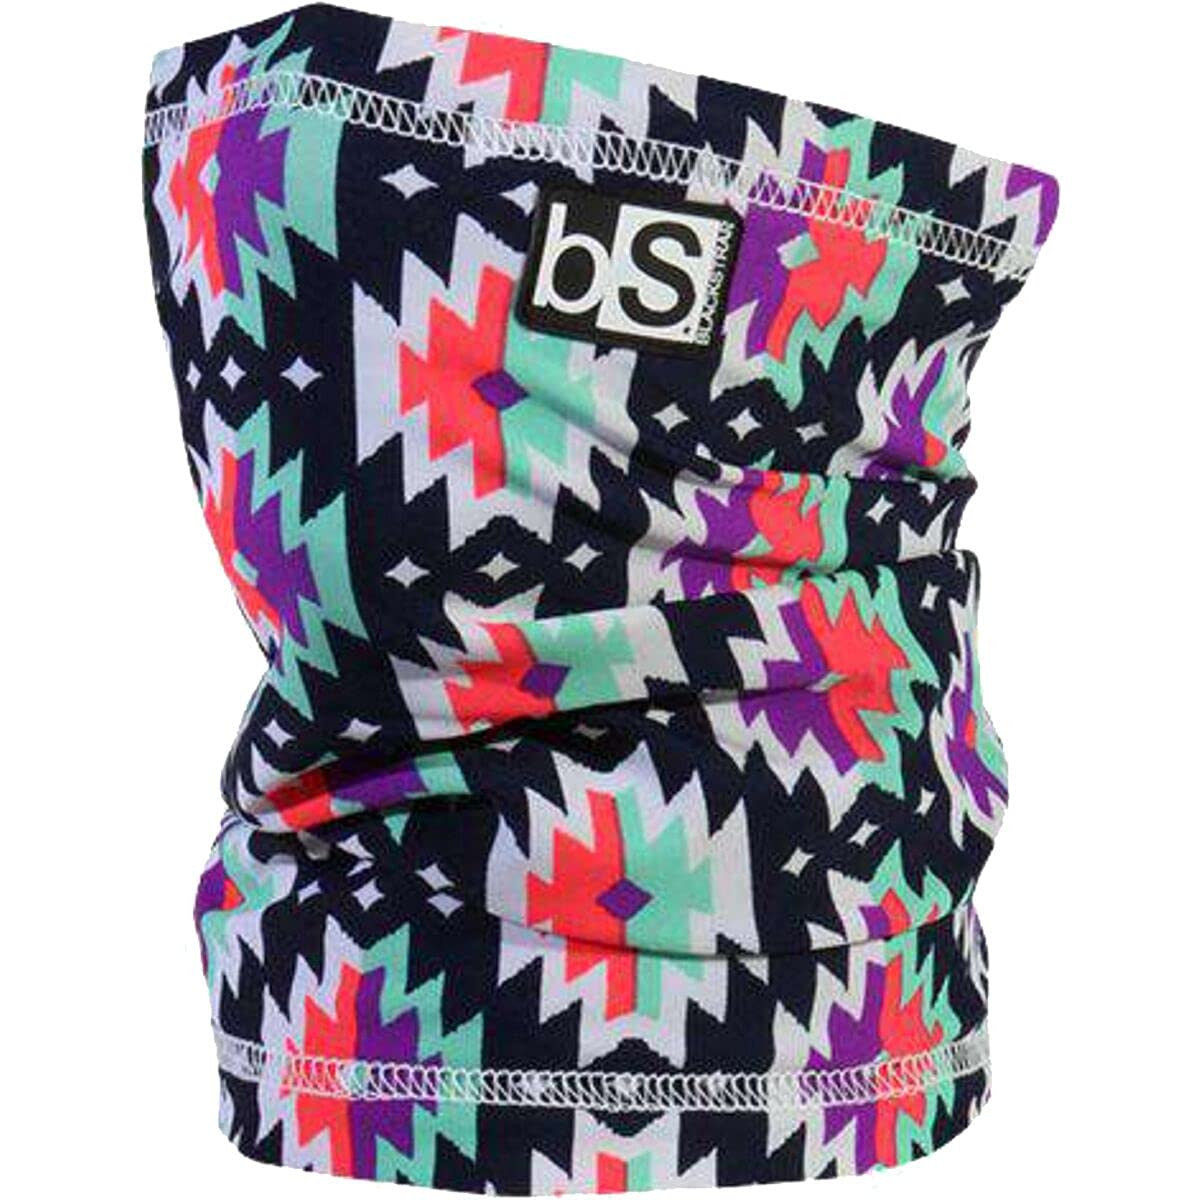 Blackstrap Youth Tube Limited Print OS Neck Warmers & Face Masks